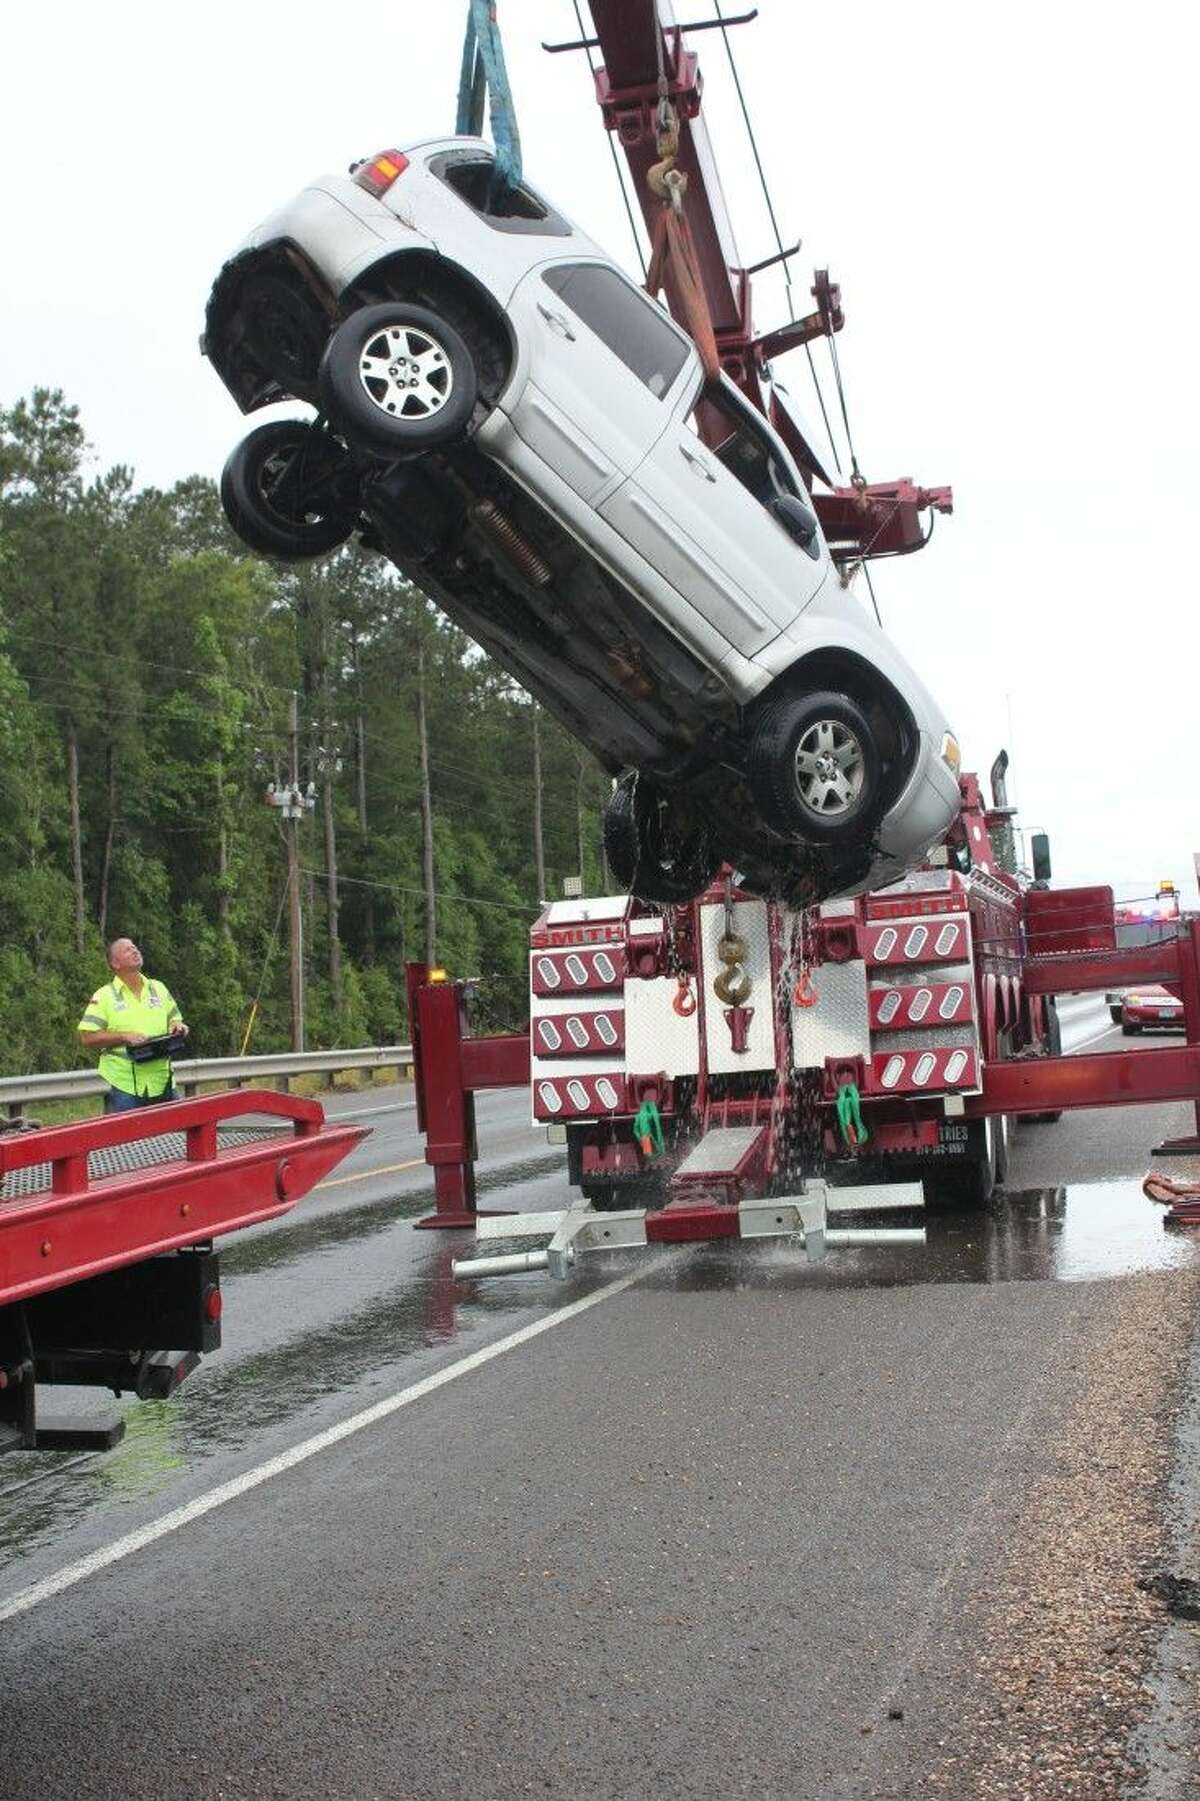 Water pours out of a Ford Escape while being lifted into the air by a Smith Towing truck operated by Jesse Burch. The Ford Escape was destroyed by floodwaters on Monday, April 18, at the Tarkington Bayou bridge on SH 321.